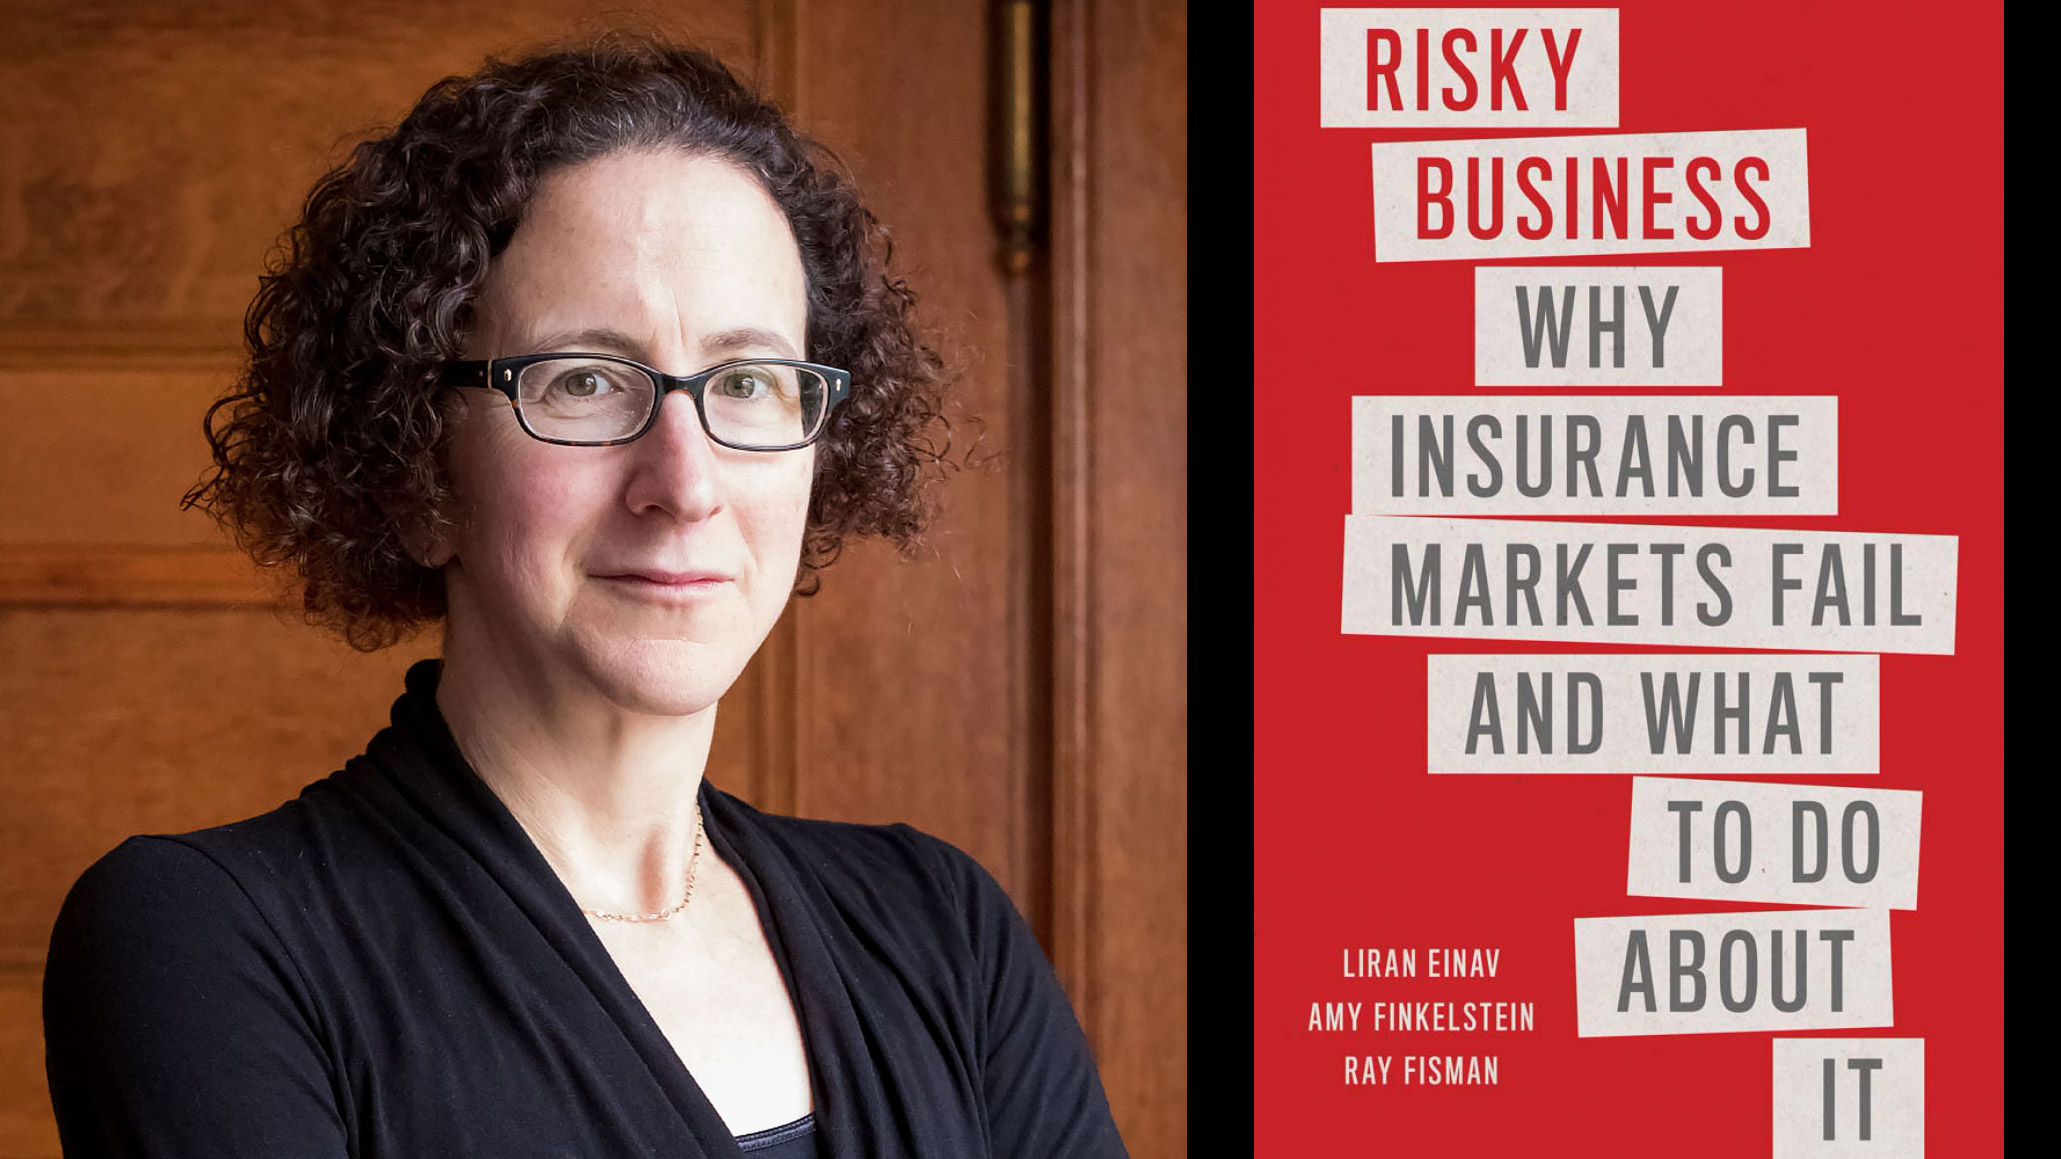 Amy Finkelstein headshot, and cover of &quot;Risky Business: Why Insurance Markets Fail and What to do about it&quot;